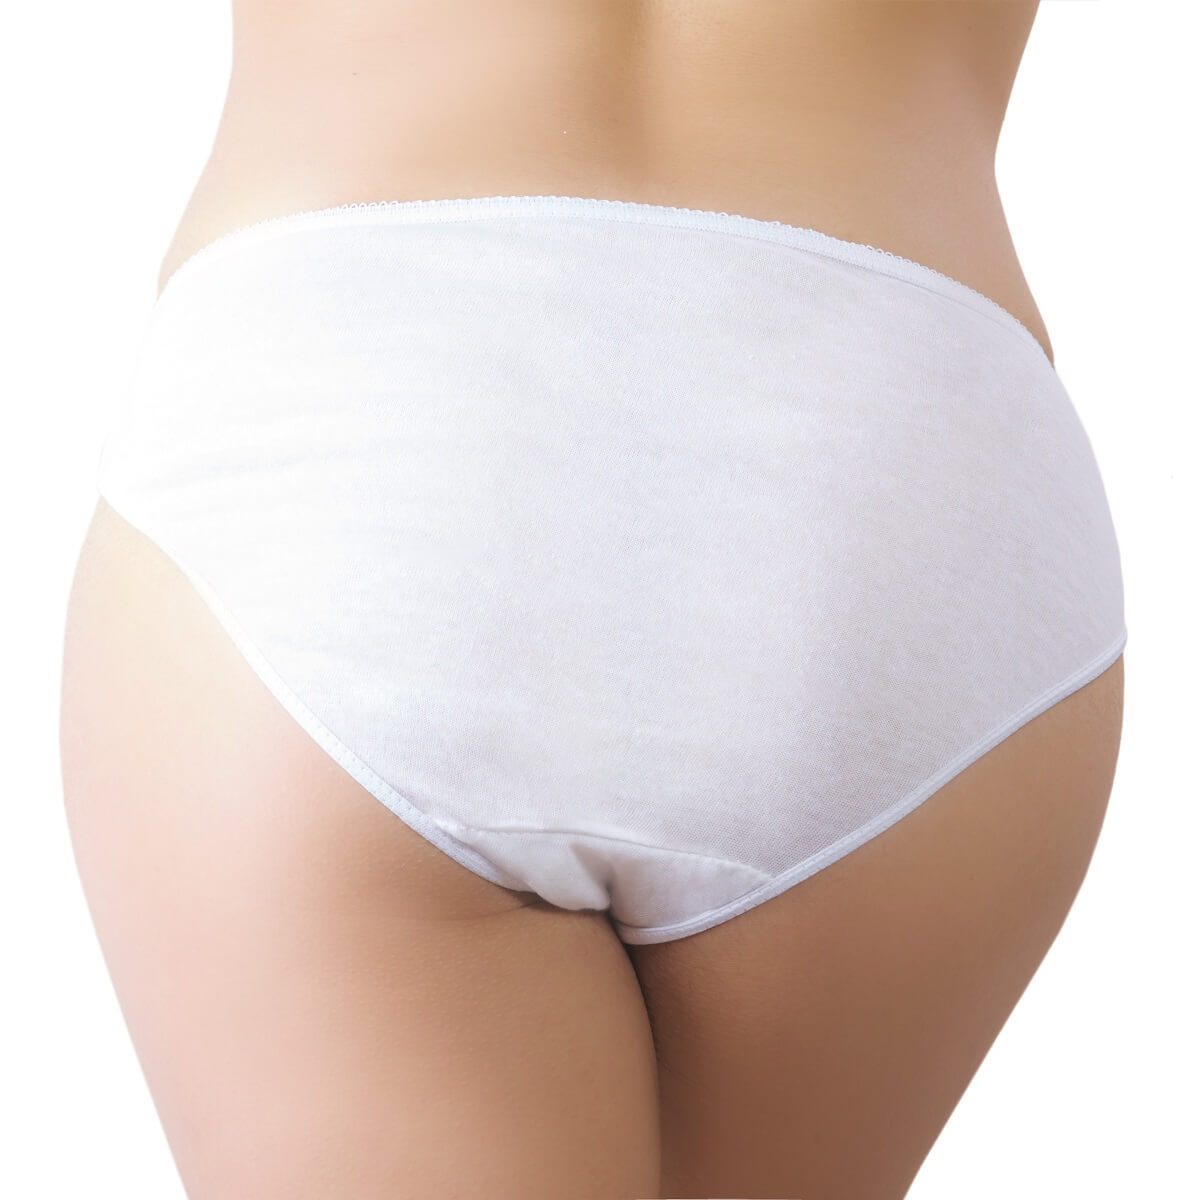 Disposable white travel underwear. Cotton knickers briefs and panties 5pcs